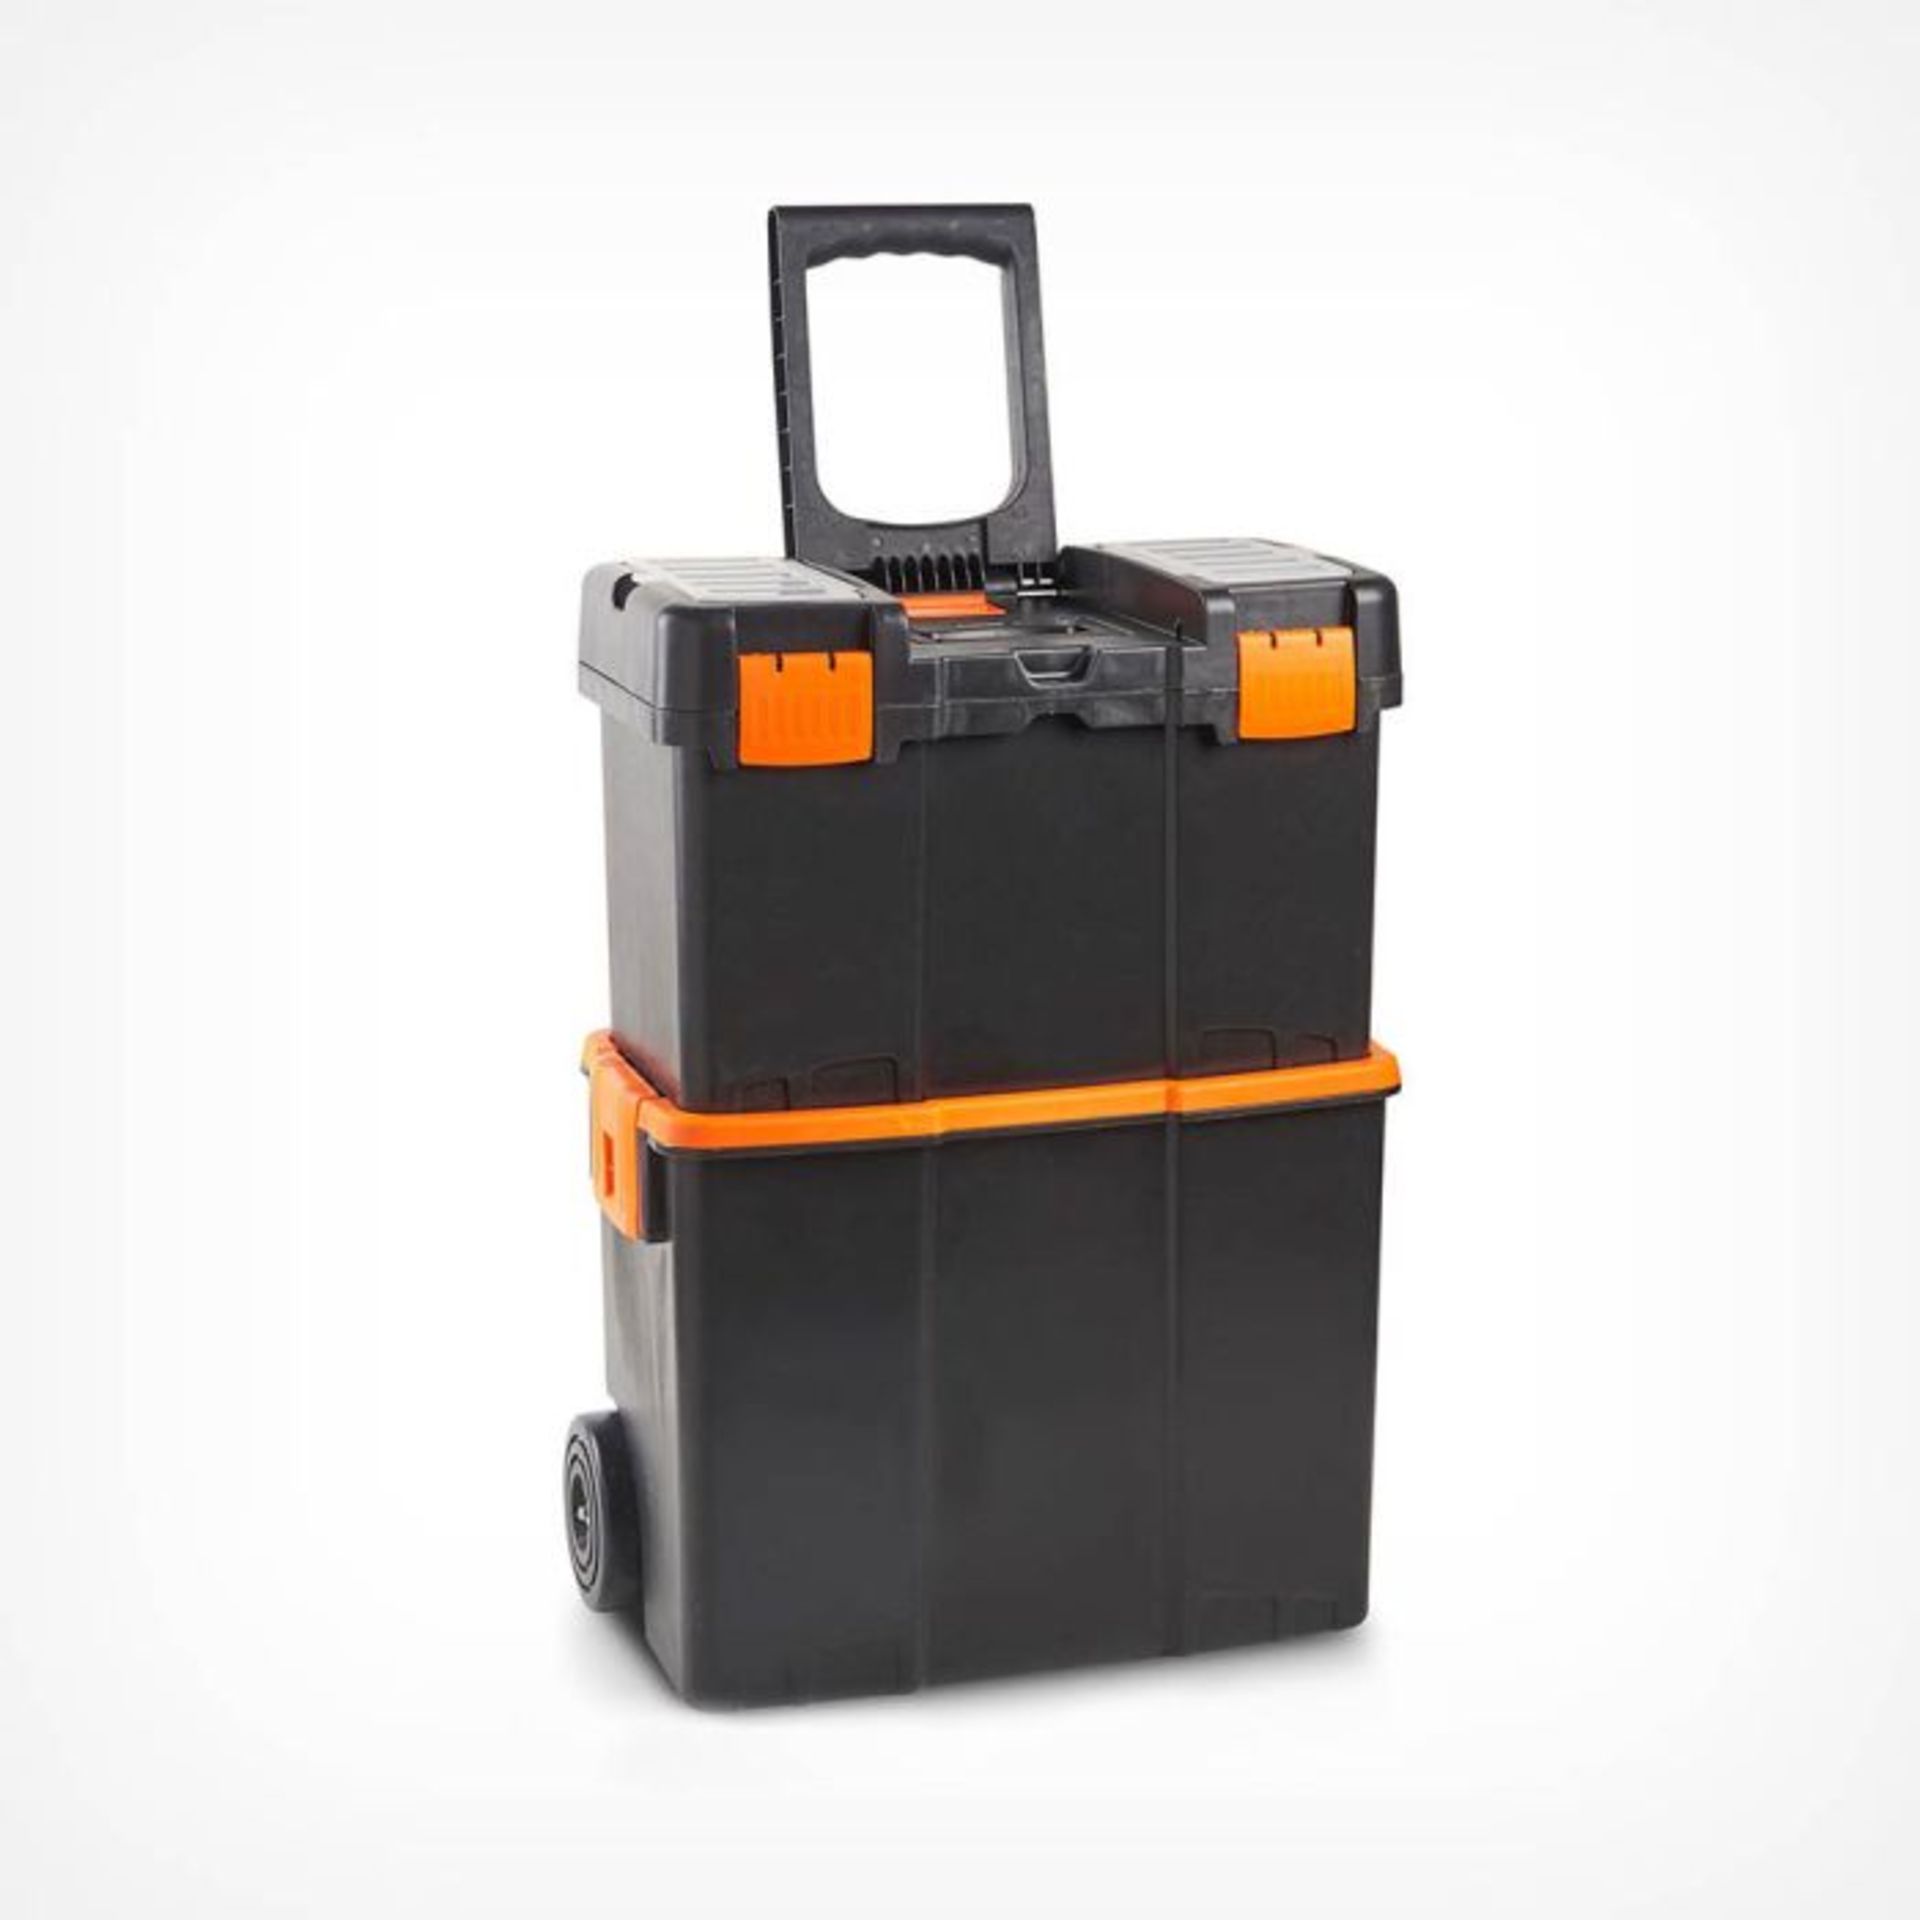 Roller Tool Box. - ER36. With clever compartments made to hold everything from large handheld